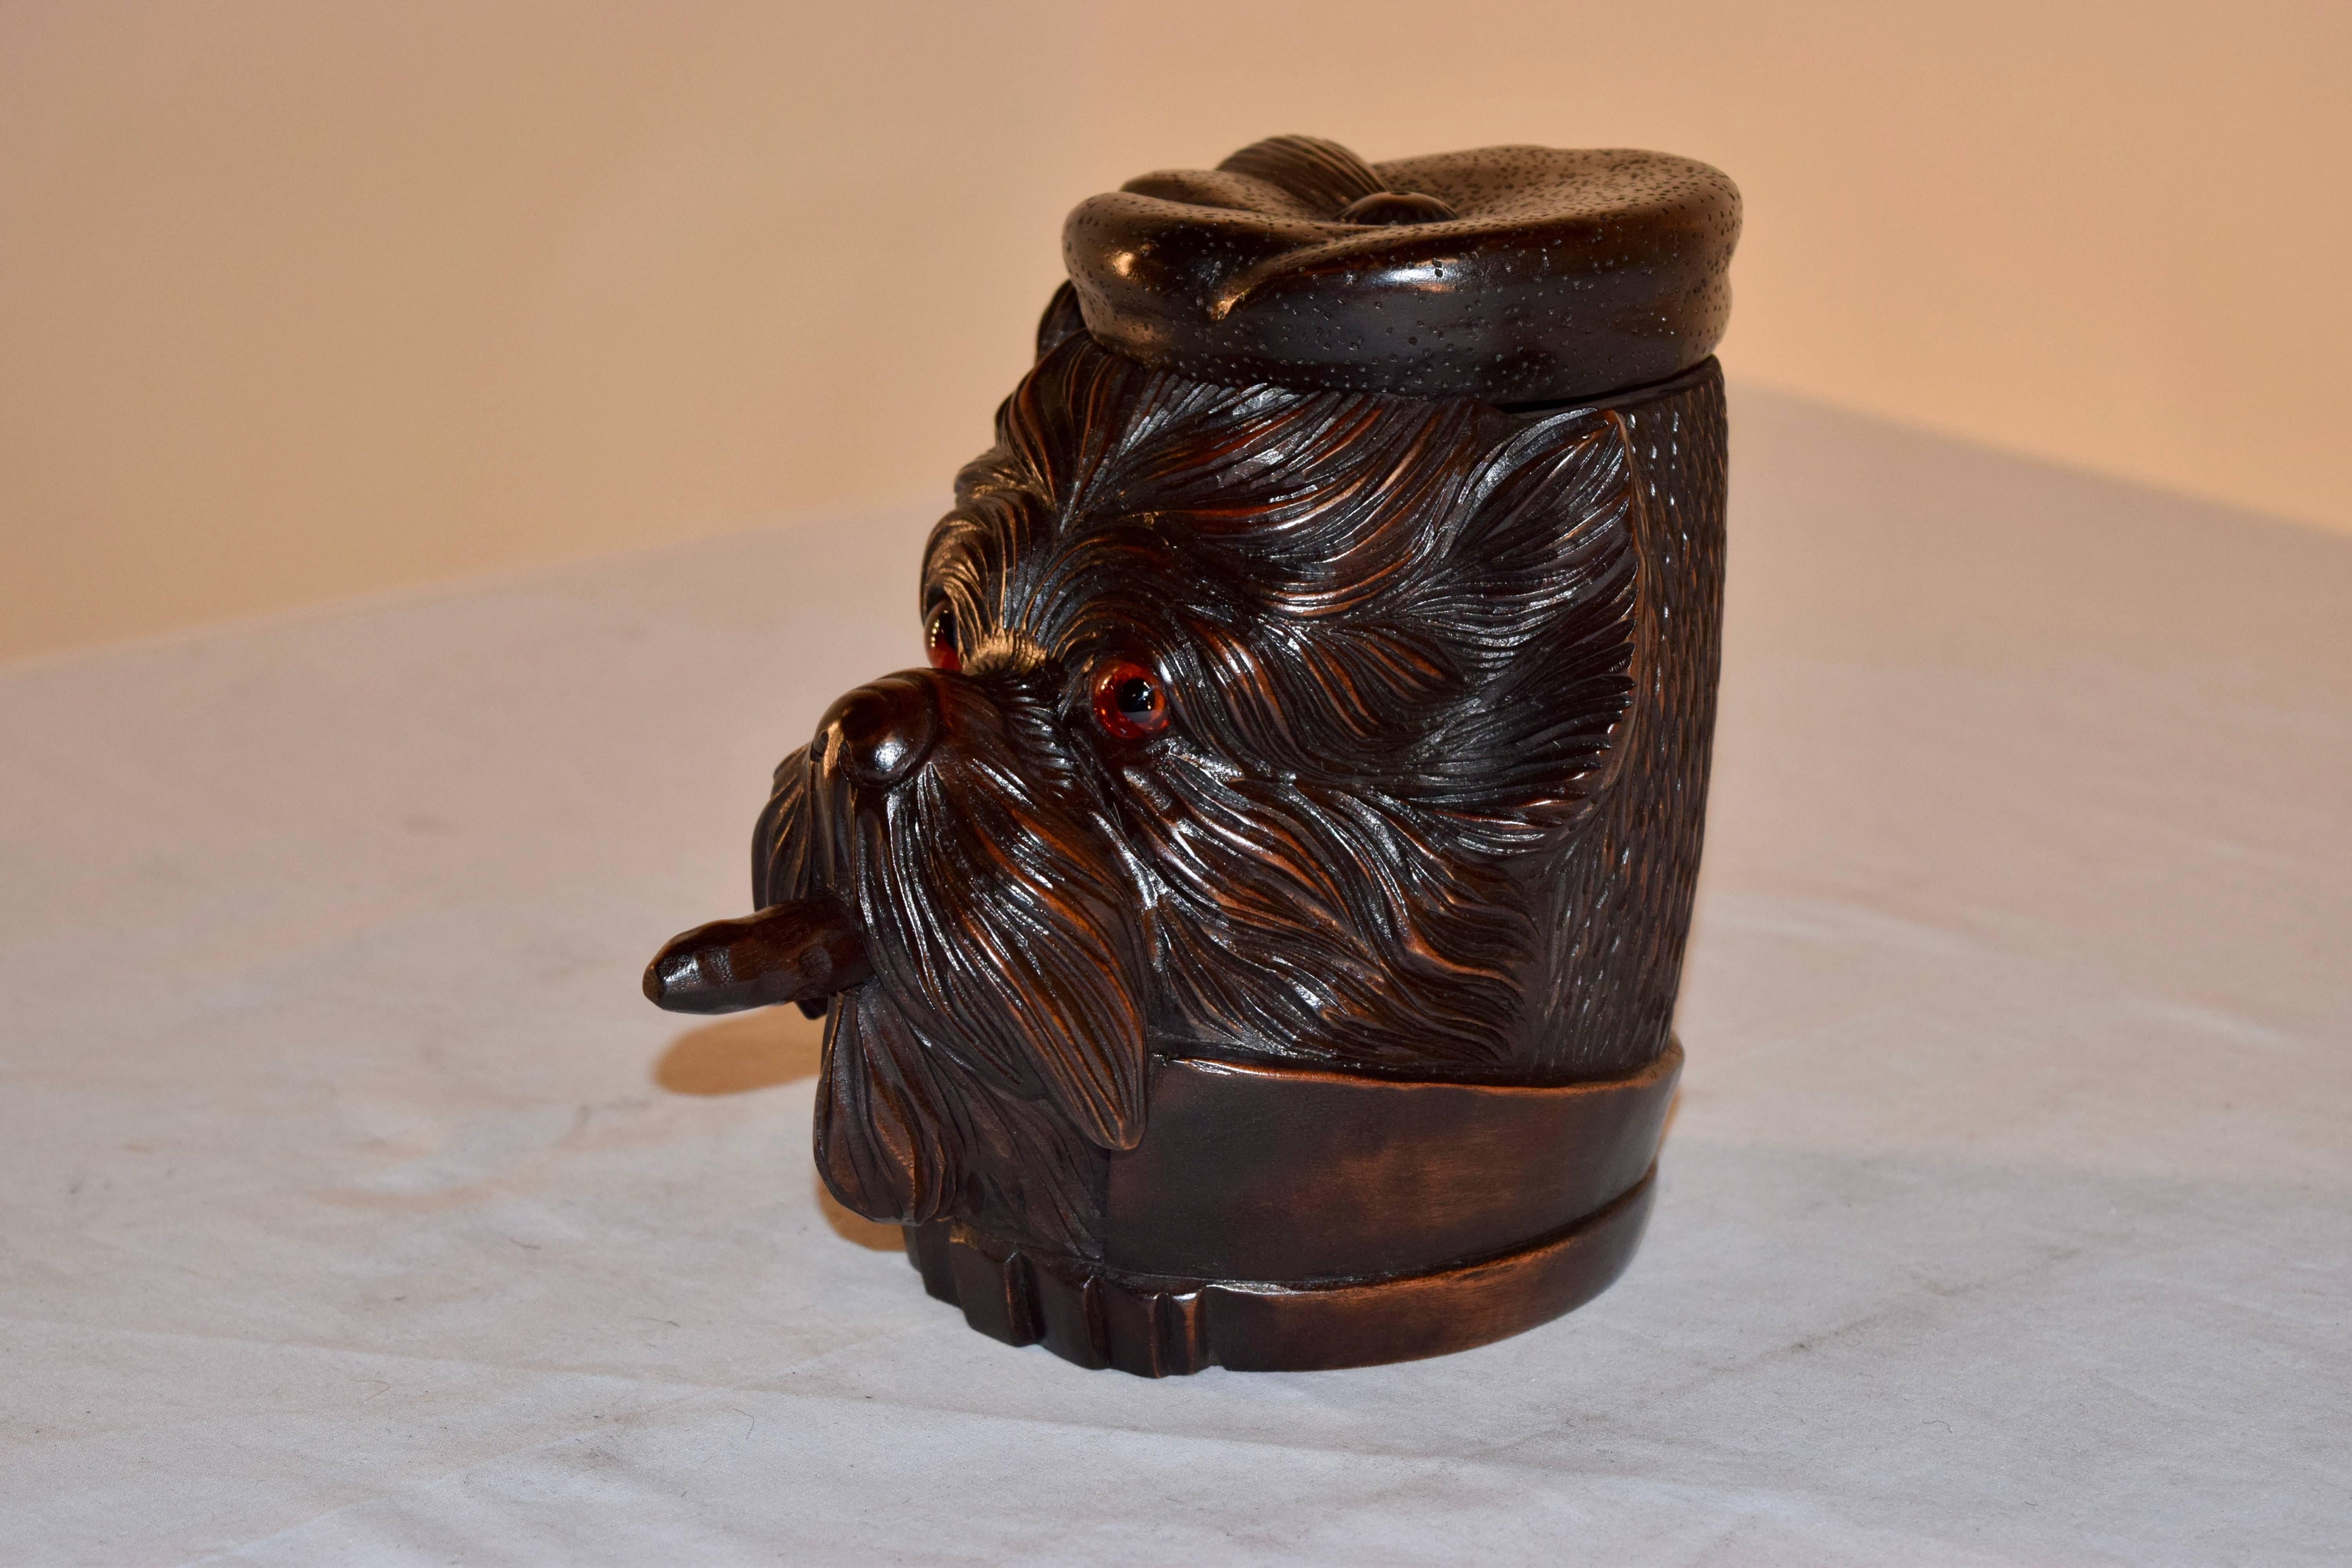 19th century black forest hand-carved humidor in the shape of a terrier. His hat lifts to reveal open storage for tobacco, and he is smoking a cigar. Original glass eyes.